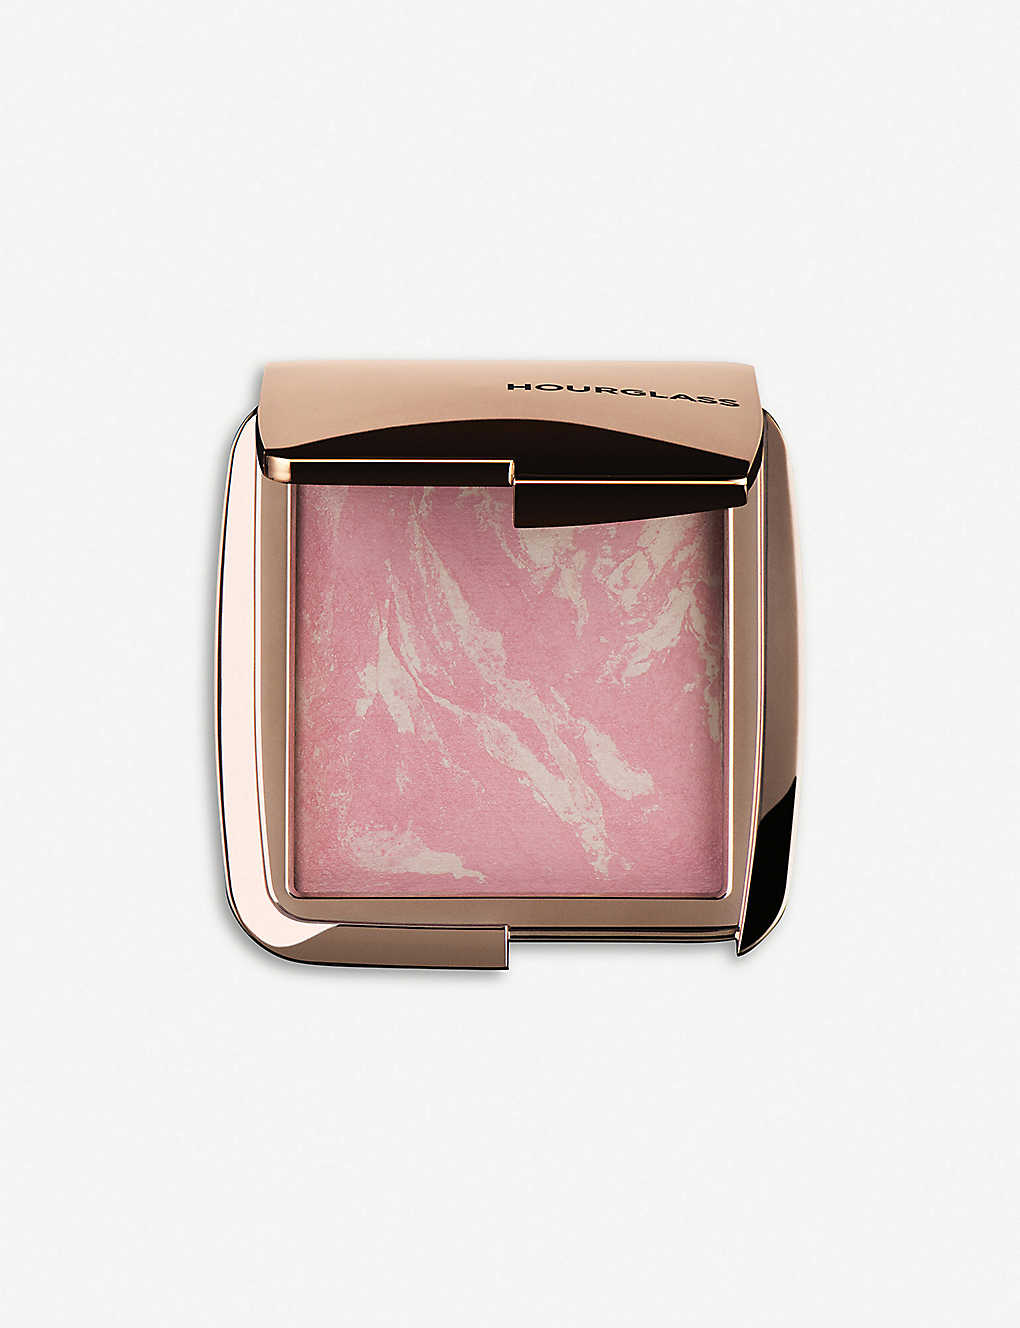 Shop Hourglass Ethereal Glow Ambient Lighting Blush 4.2g